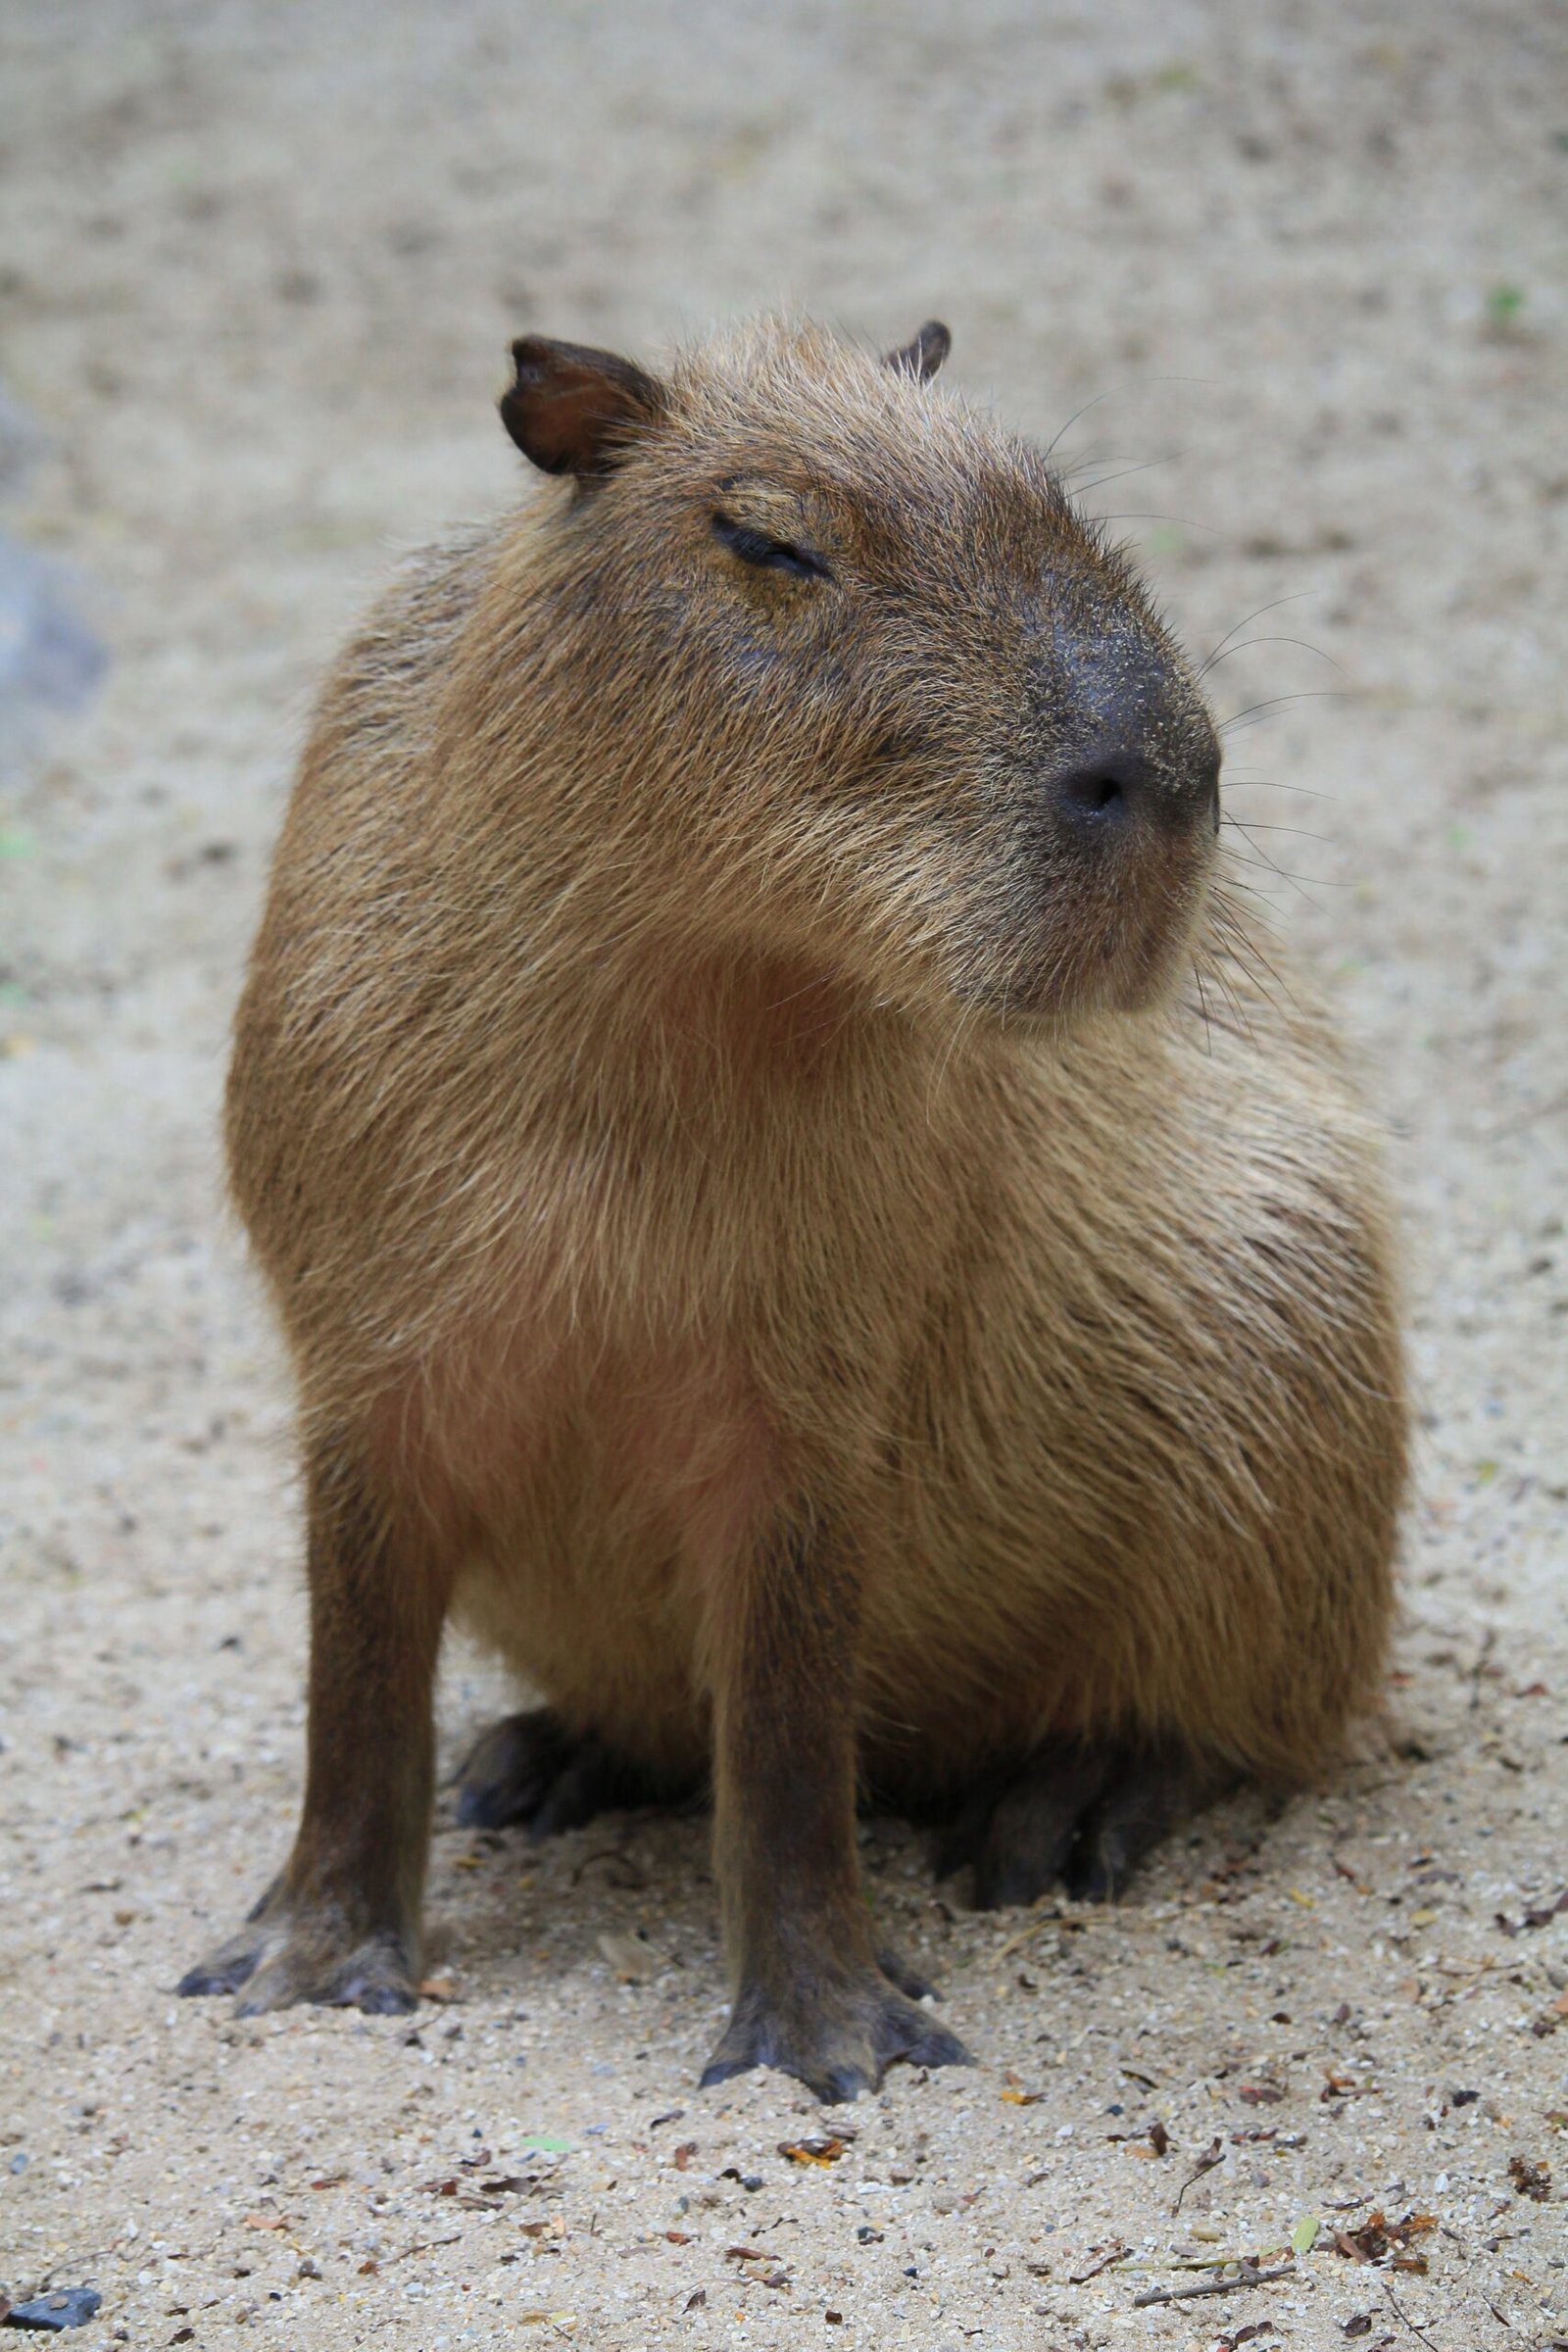 Where to Buy Capybaras in Indiana